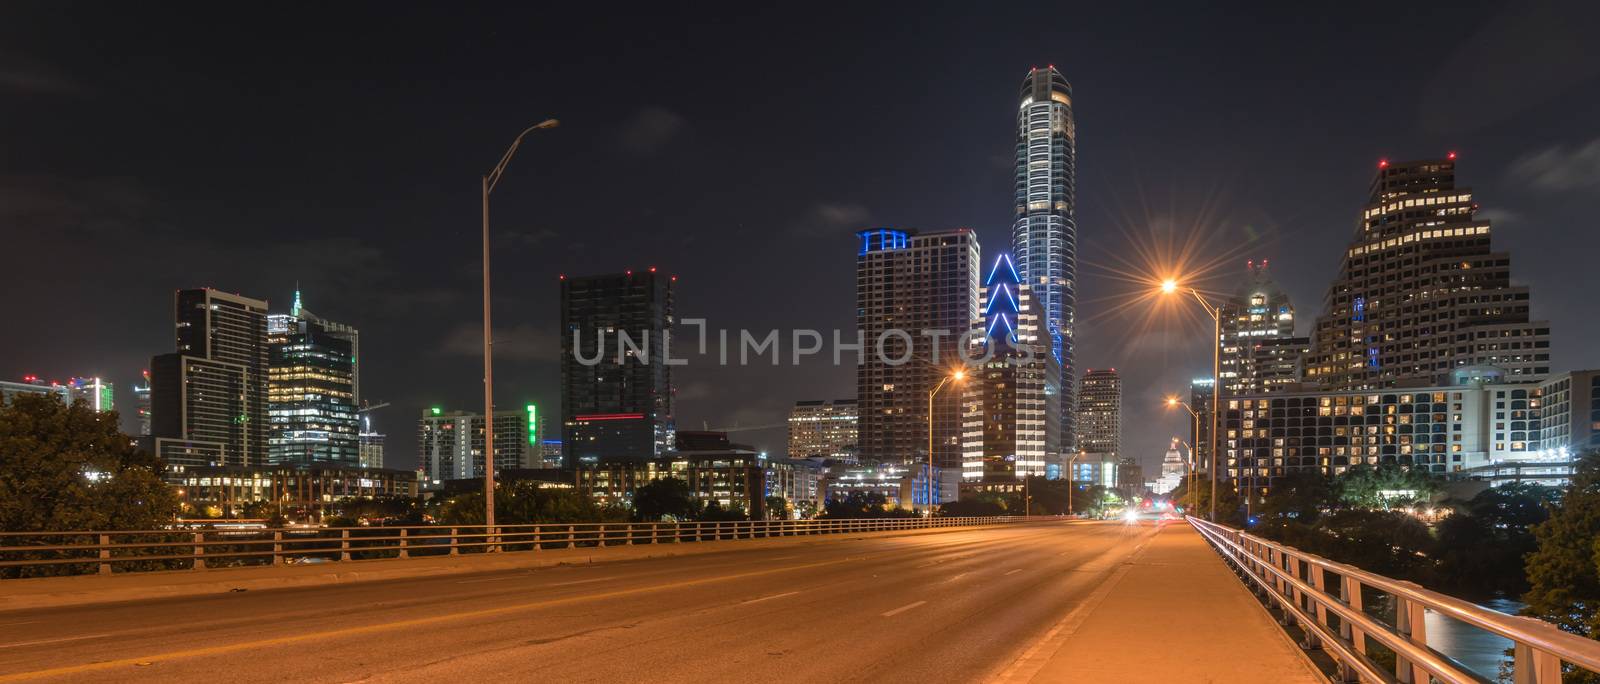 Panorama view downtown Austin at night with traffic light trail lead to Texas State capitol building. View from pedestrian sidewalk on bridge across Colorado River